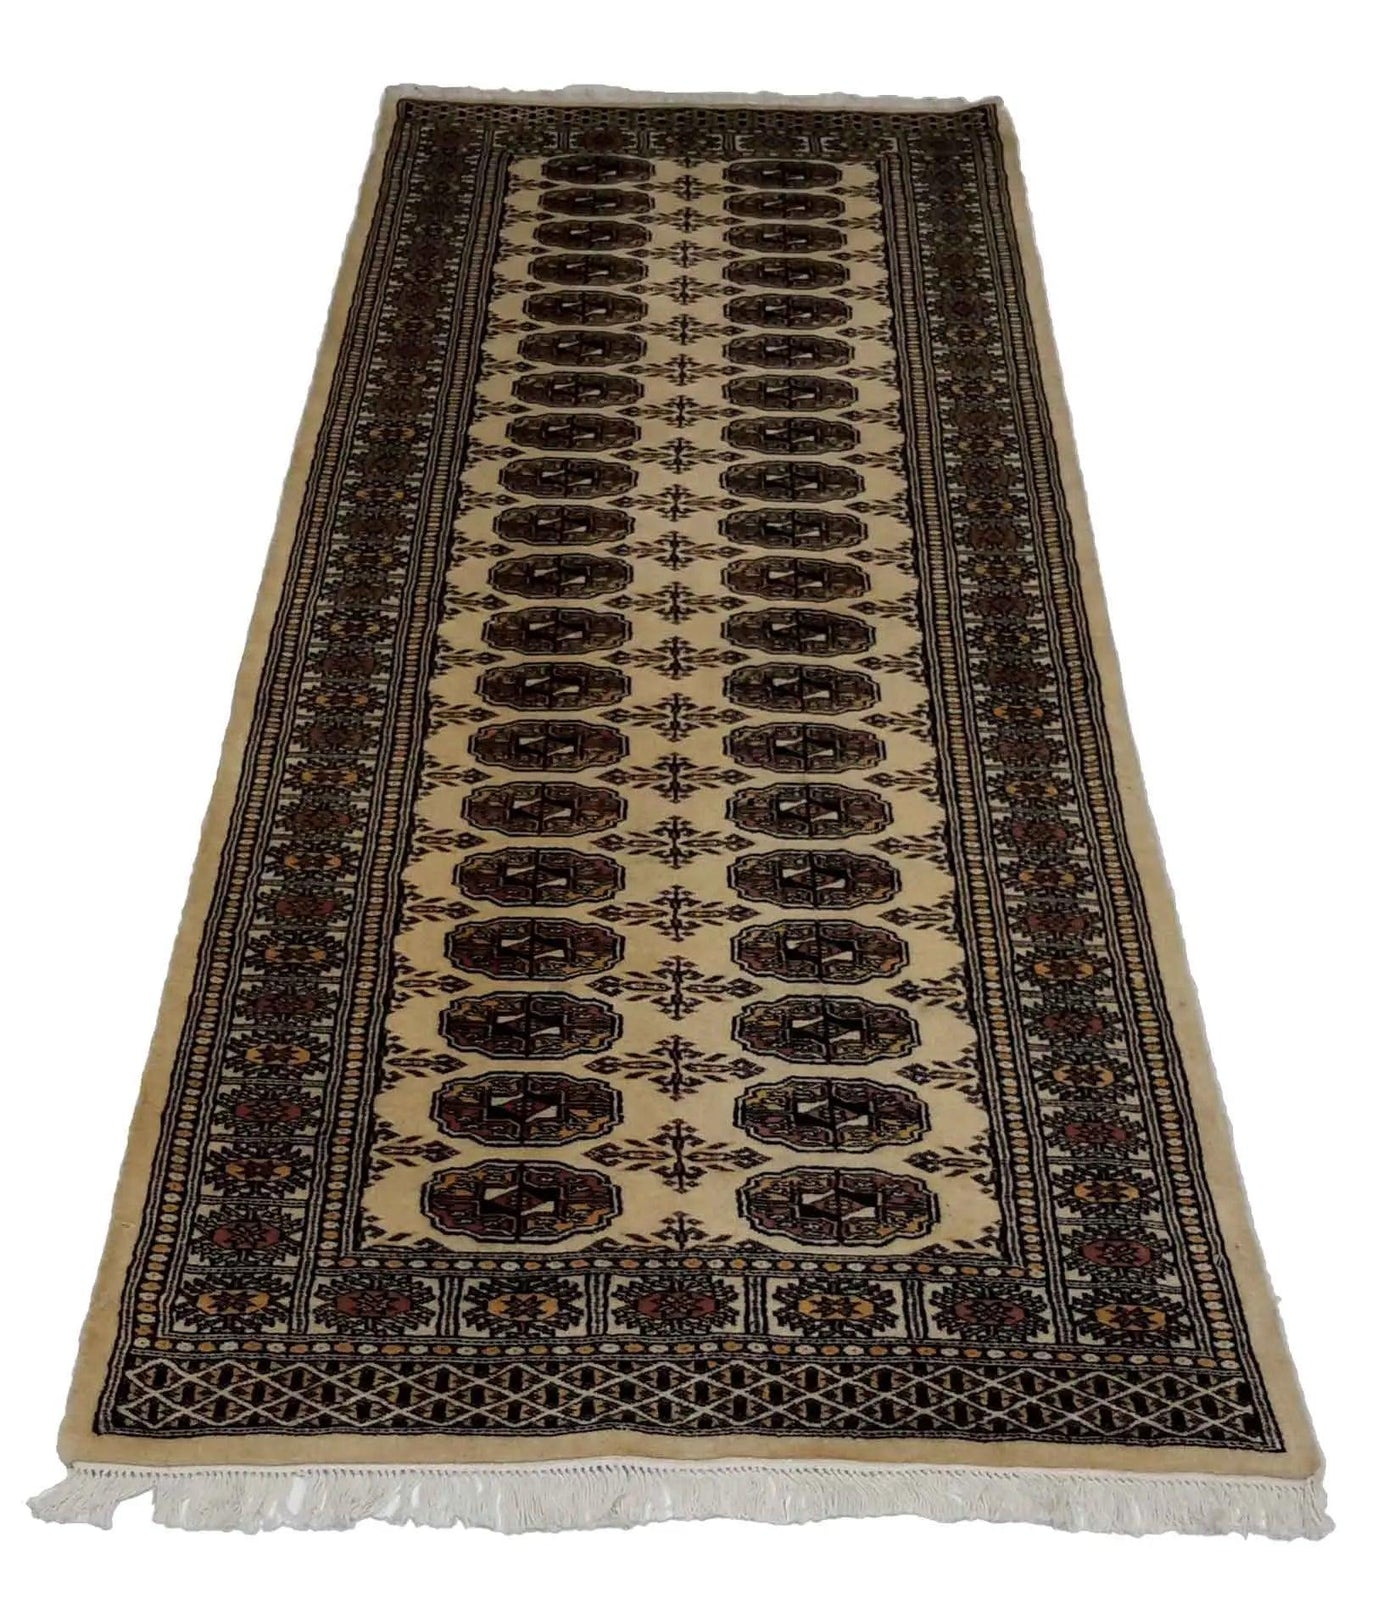 Canvello Hand Made Formal All Over Pakistan Bokhara Rug - 2'7'' X 8'0''